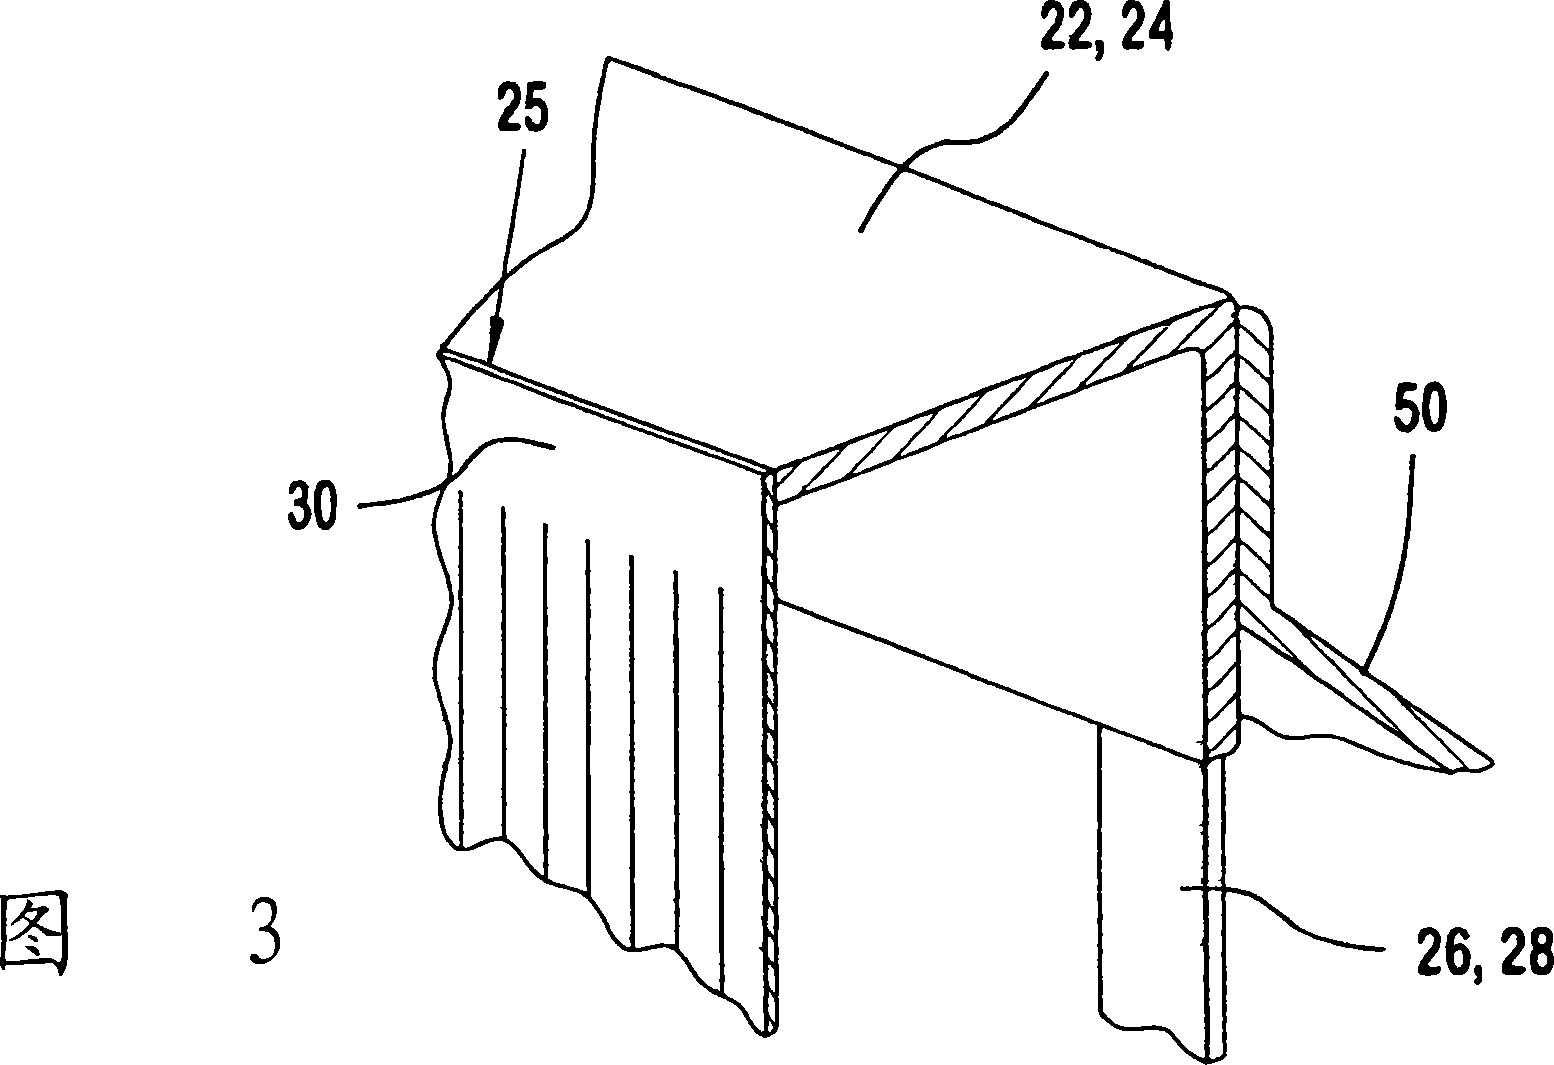 Unified magnetic shielding of tensioned mask/frame assembly and internal magnetic shield